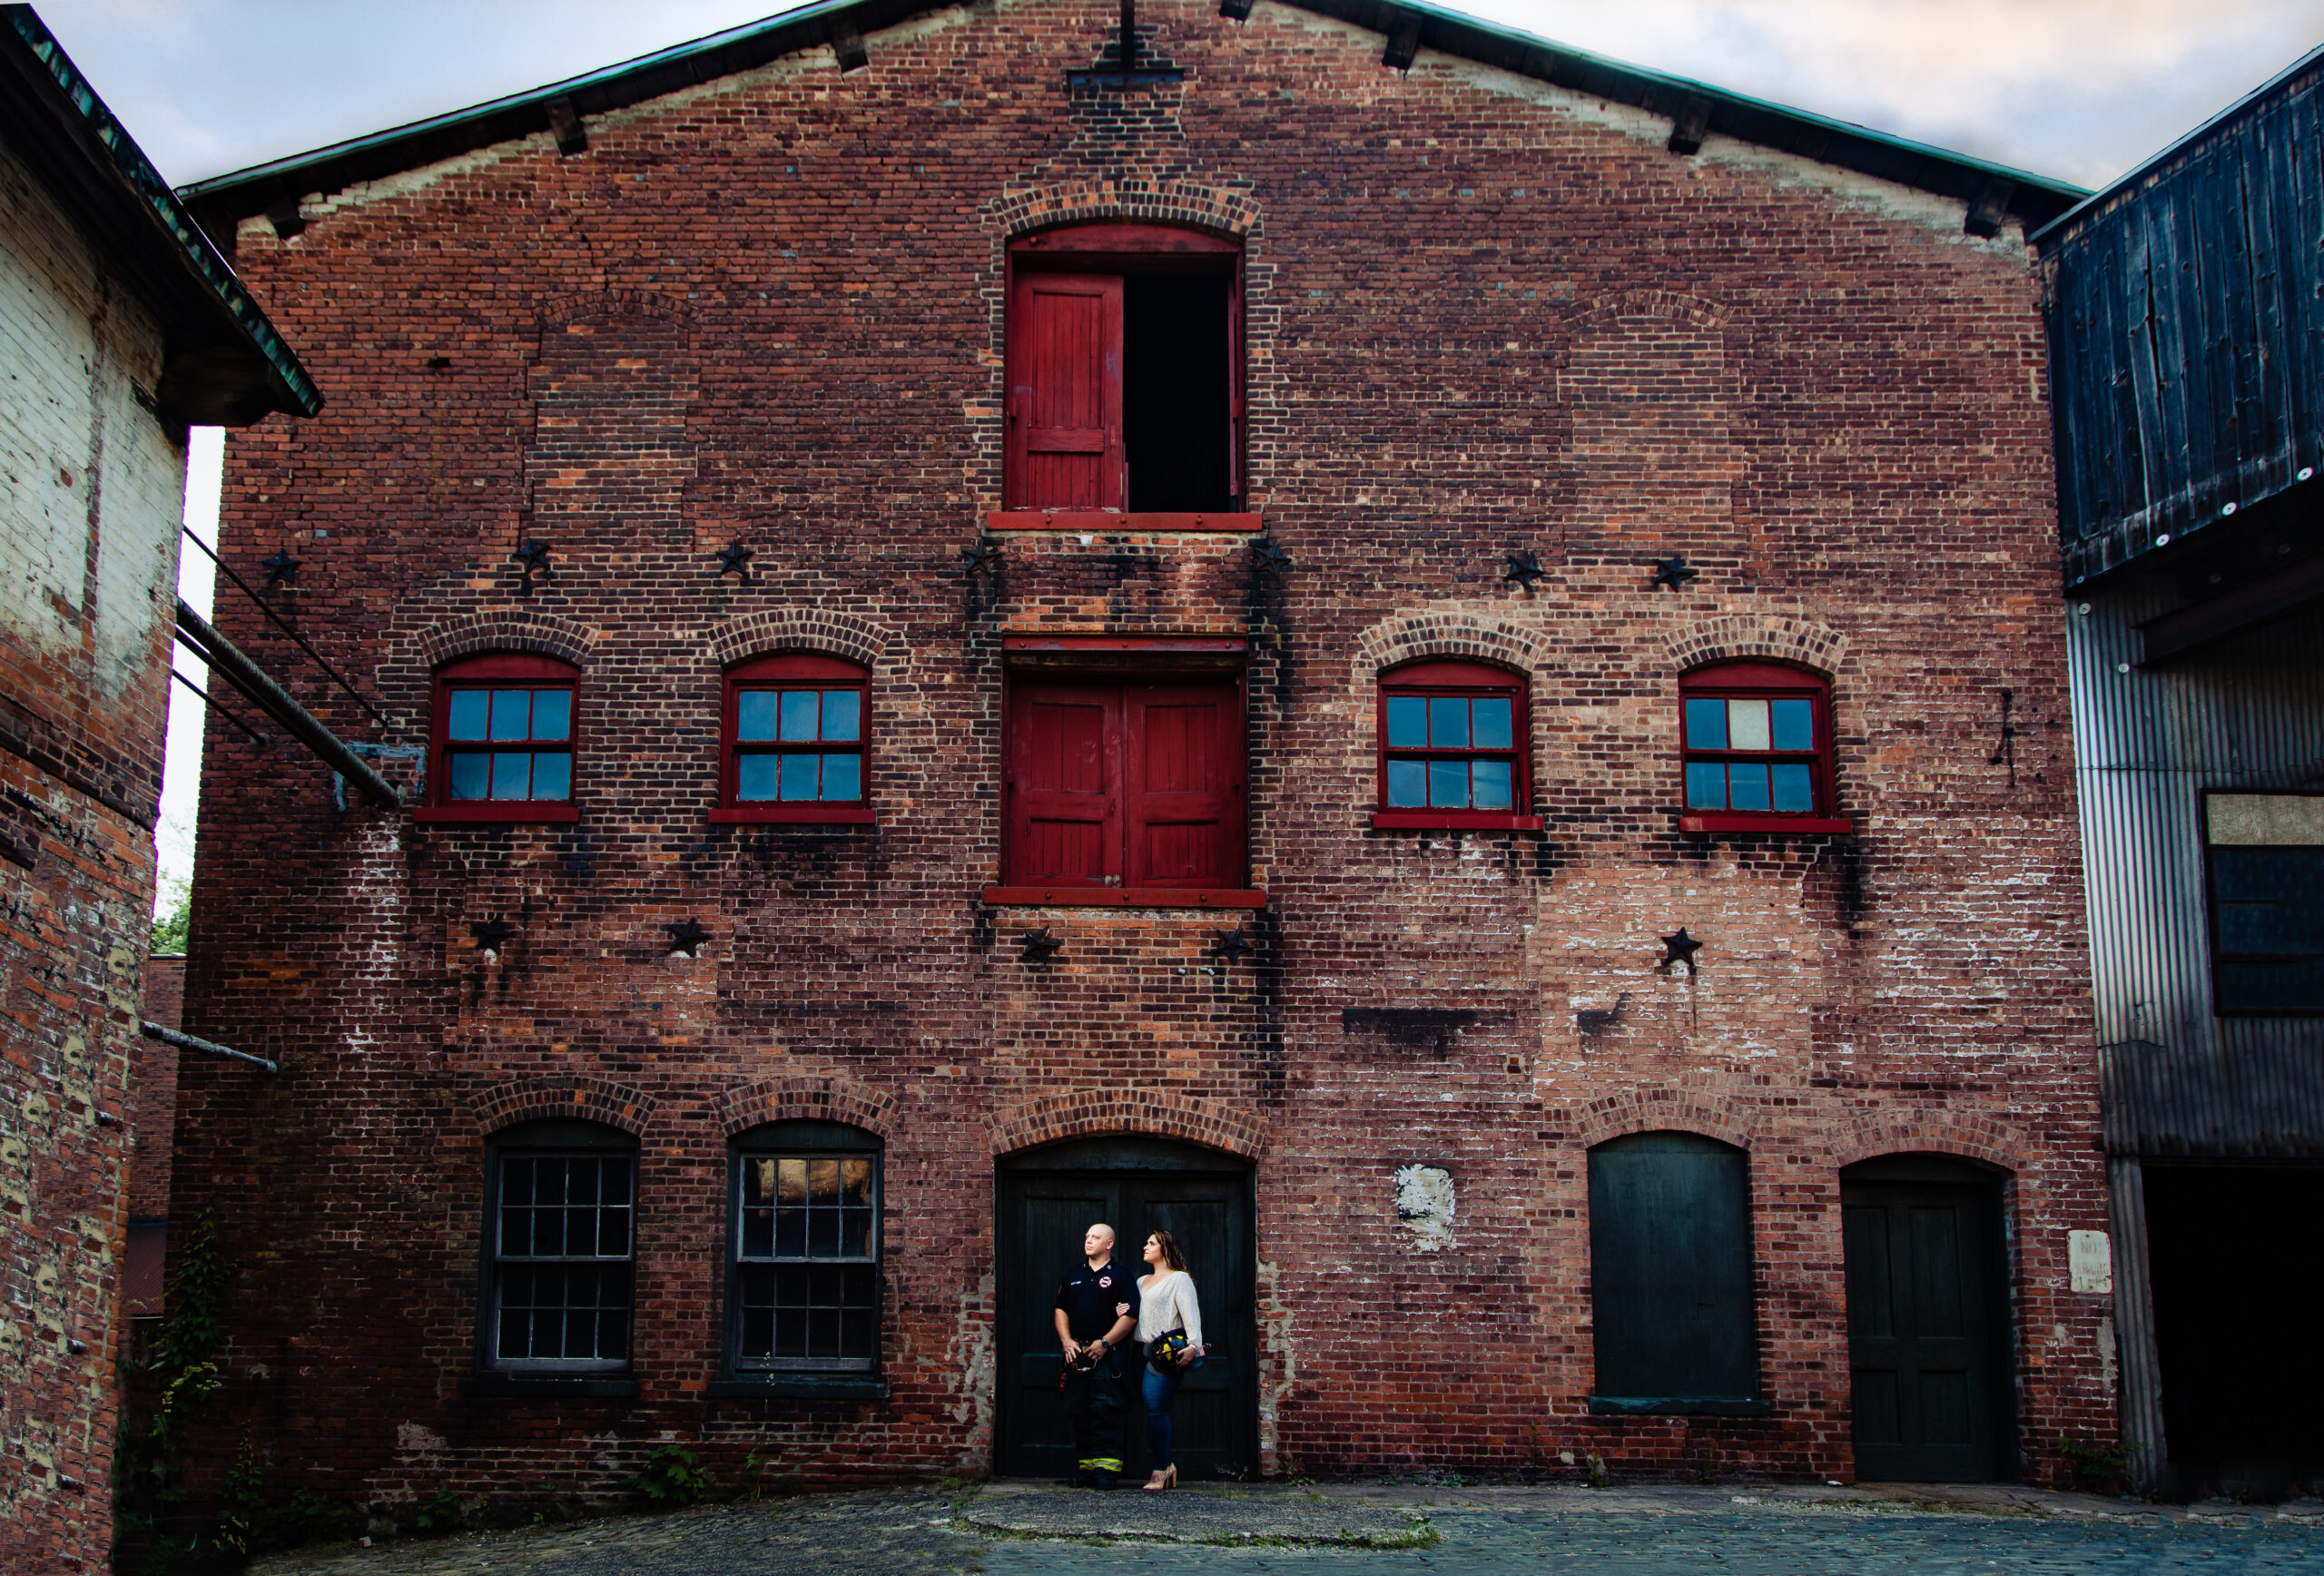 A creative engagement session portrait taken at the Art Factory in Paterson, NJ, with a stunning rustic building as the backdrop. This artfully composed scene was skillfully captured by Jarot Bocanegra Photography, showcasing the couple's love against a unique and picturesque setting